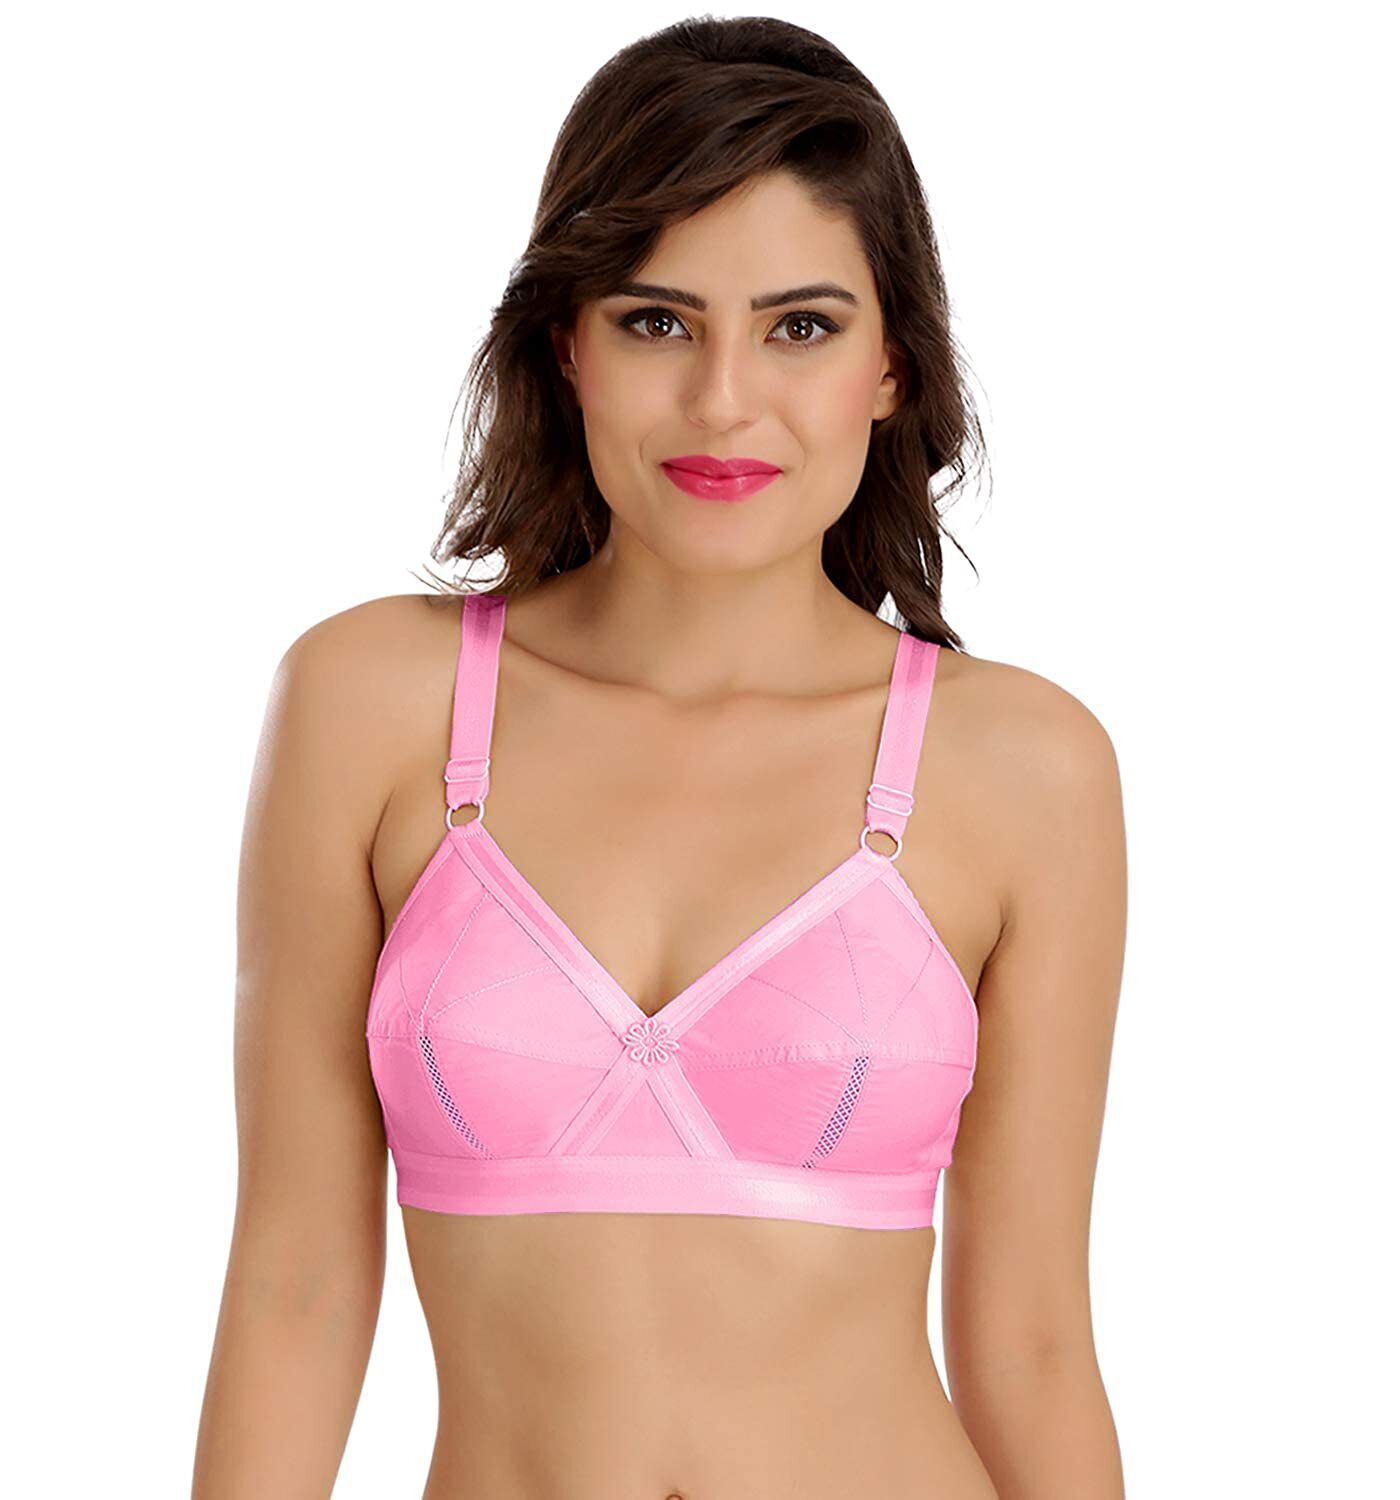 SONA Indian Women's Cotton Non-Padded Non-Wired Full Coverage Bra Color  PINK - Helia Beer Co